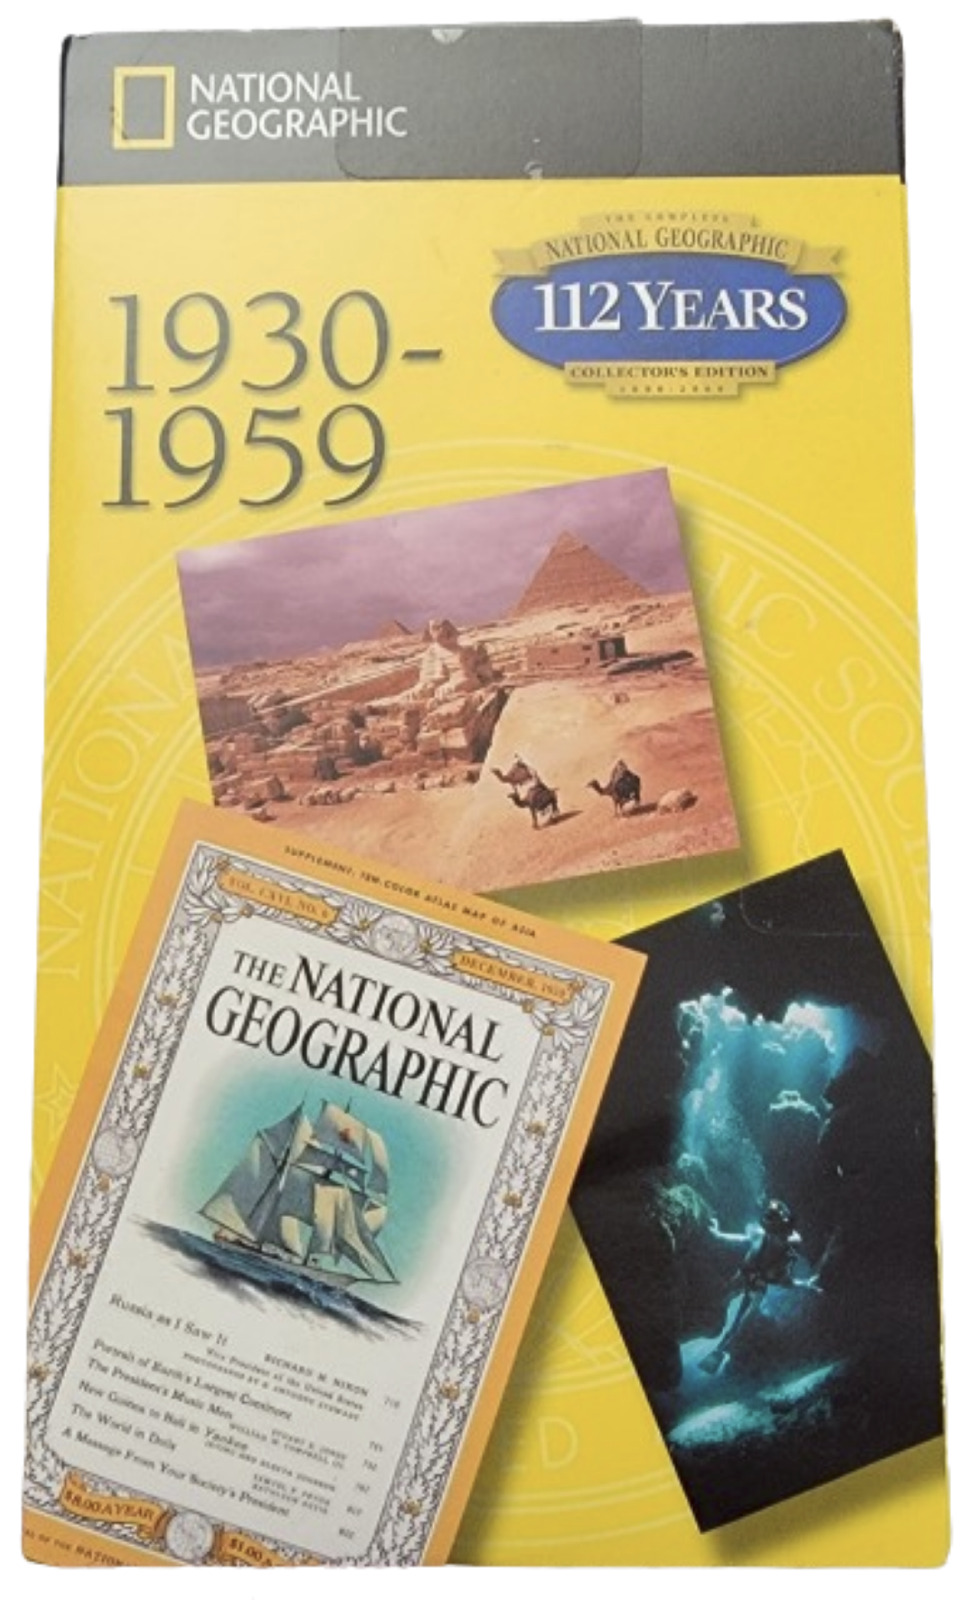 National Geographic 112 Years Collectors Edition CDs 1930-1959 Discs Near Mint